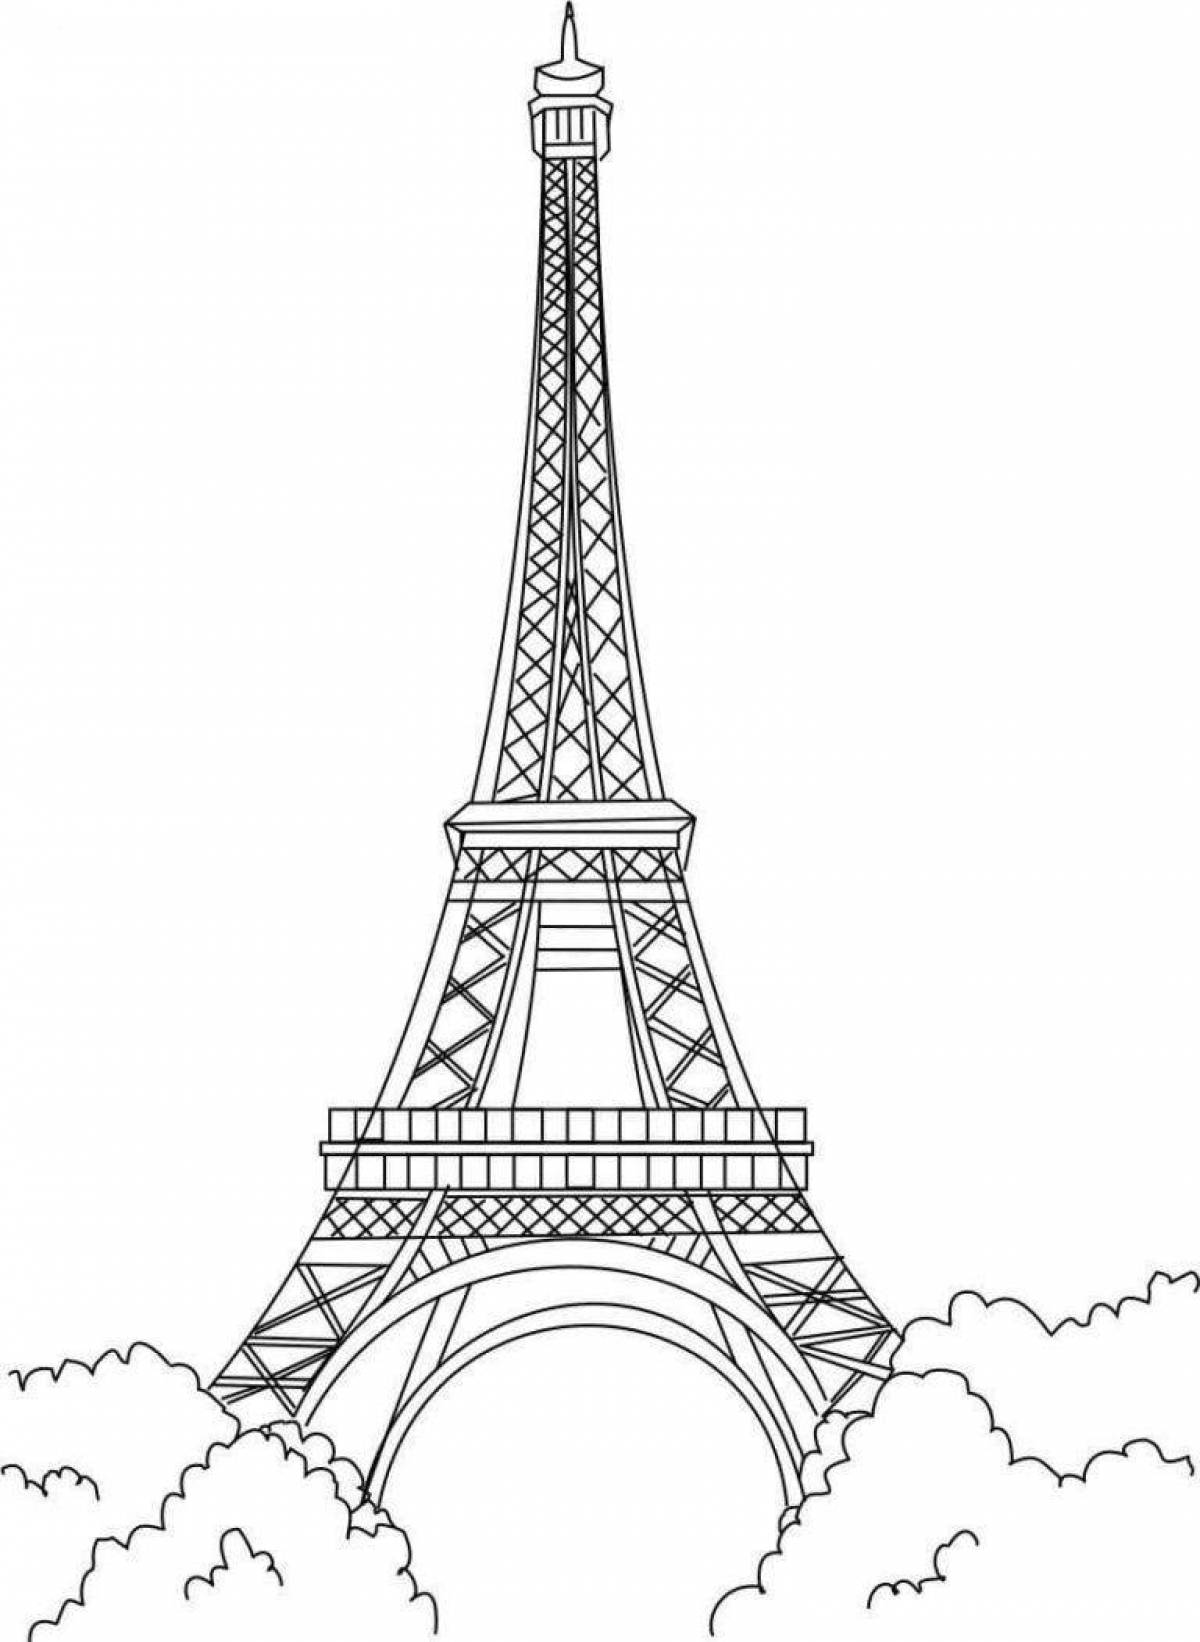 Great tower coloring book for kids